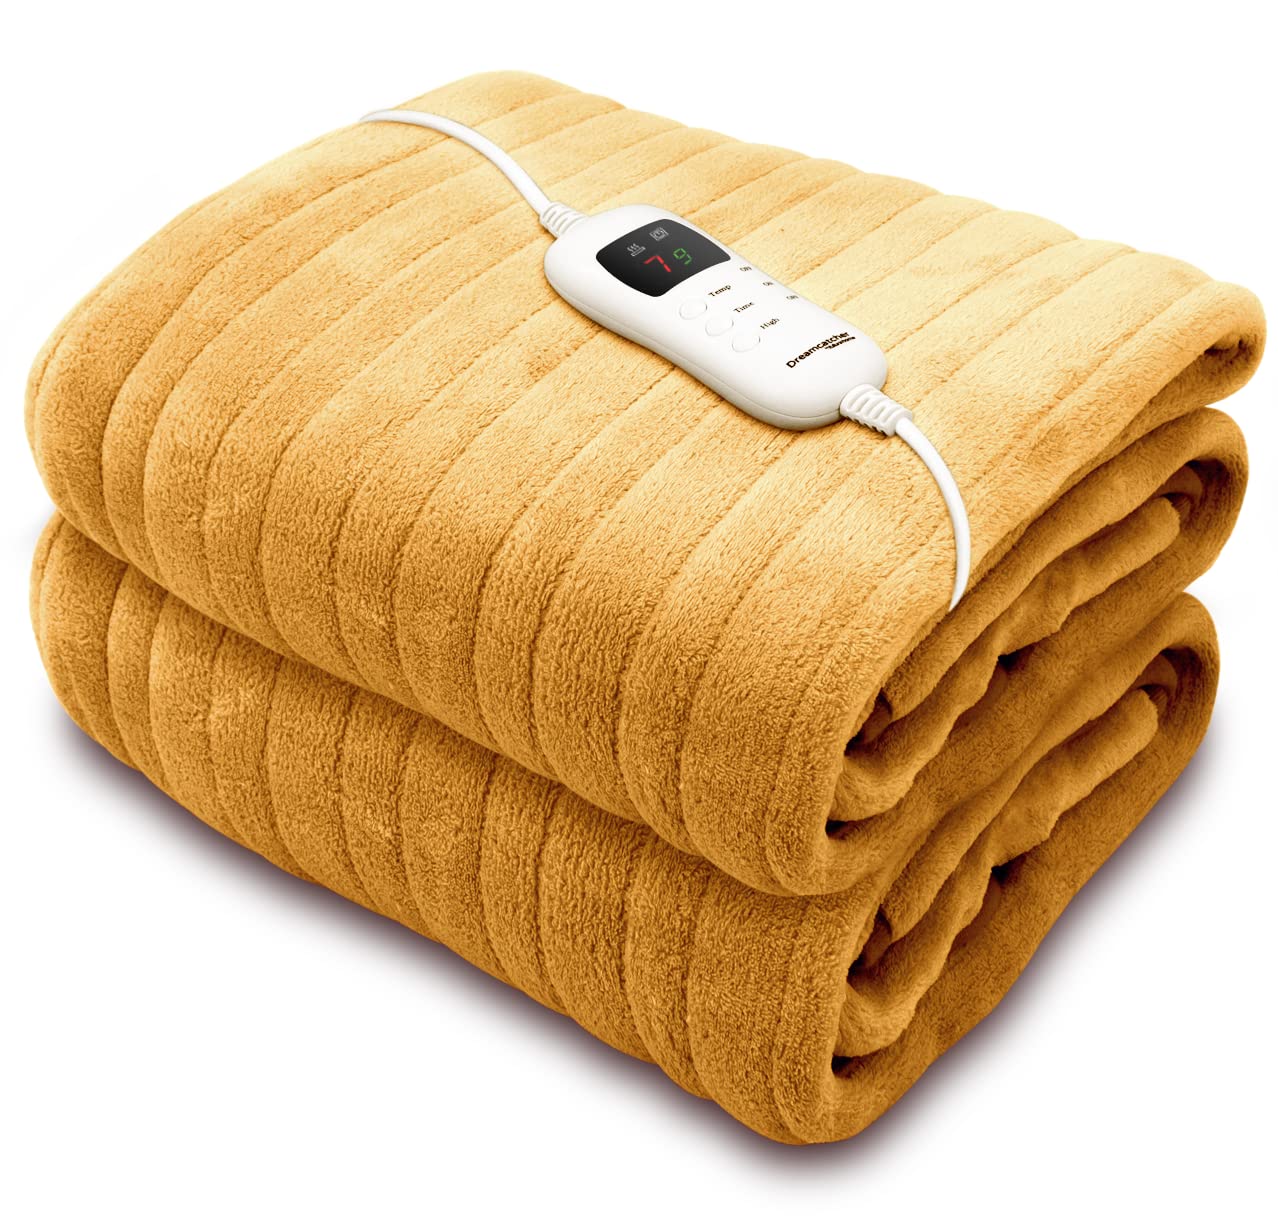 Dreamcatcher Luxurious Electric Throw Heated Throw Blanket, Large 160 x 120cm Soft Fleece Heated Blanket Throw, Large Heated Electric Blanket Overblanket with Timer 9 Control Heat Settings Gold